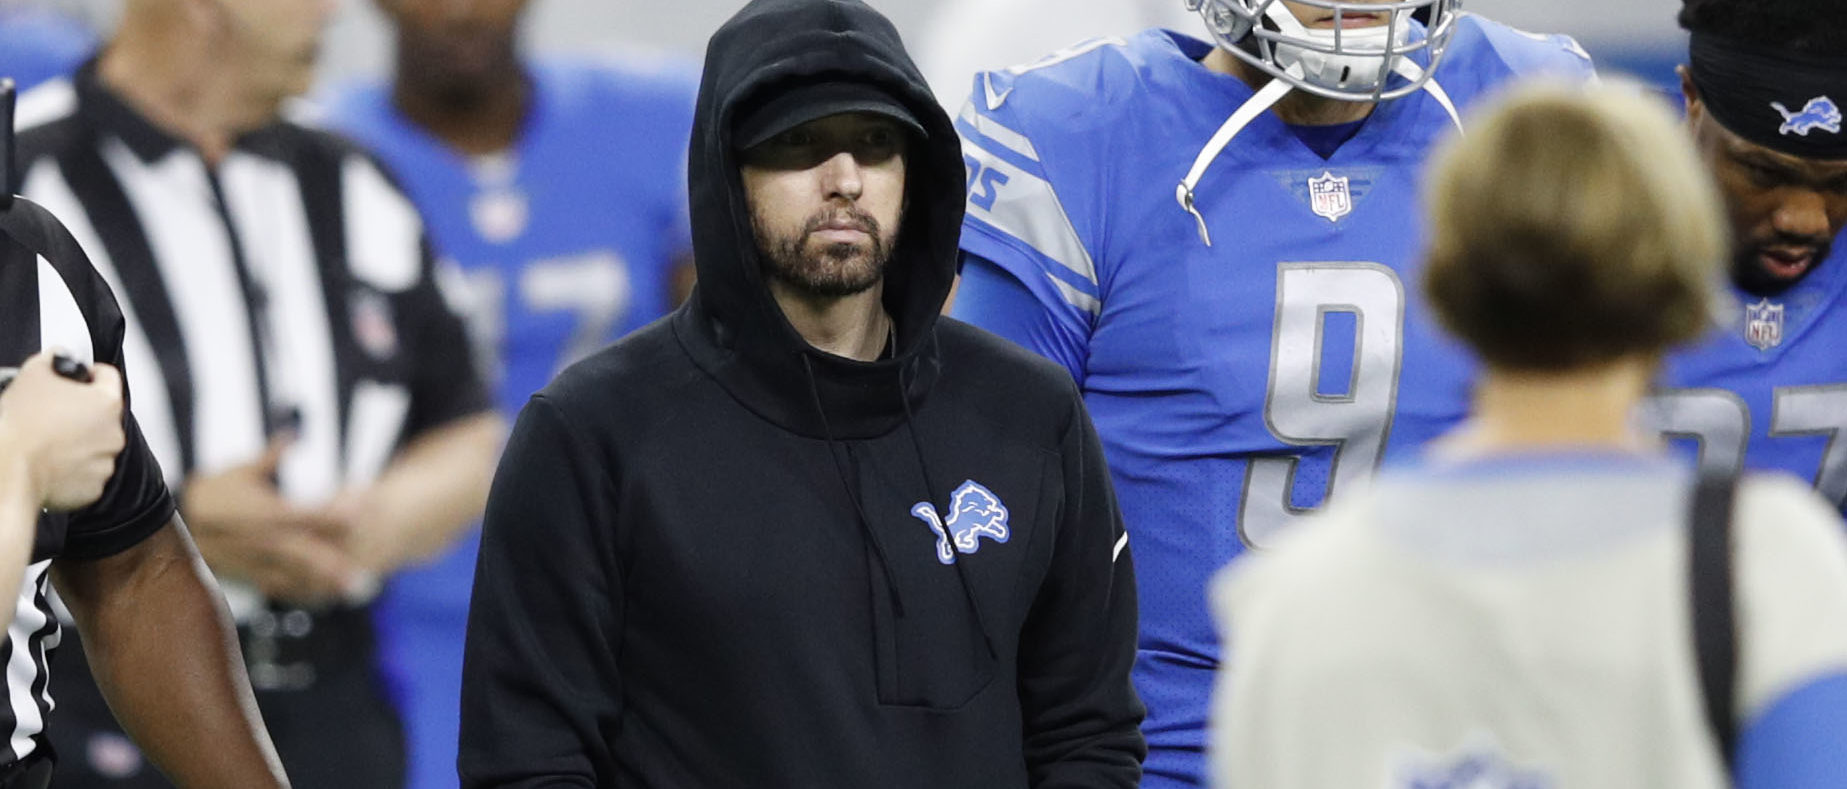 Eminem Caught On Camera Sending Simple Message To 49ers Fans F*ck You